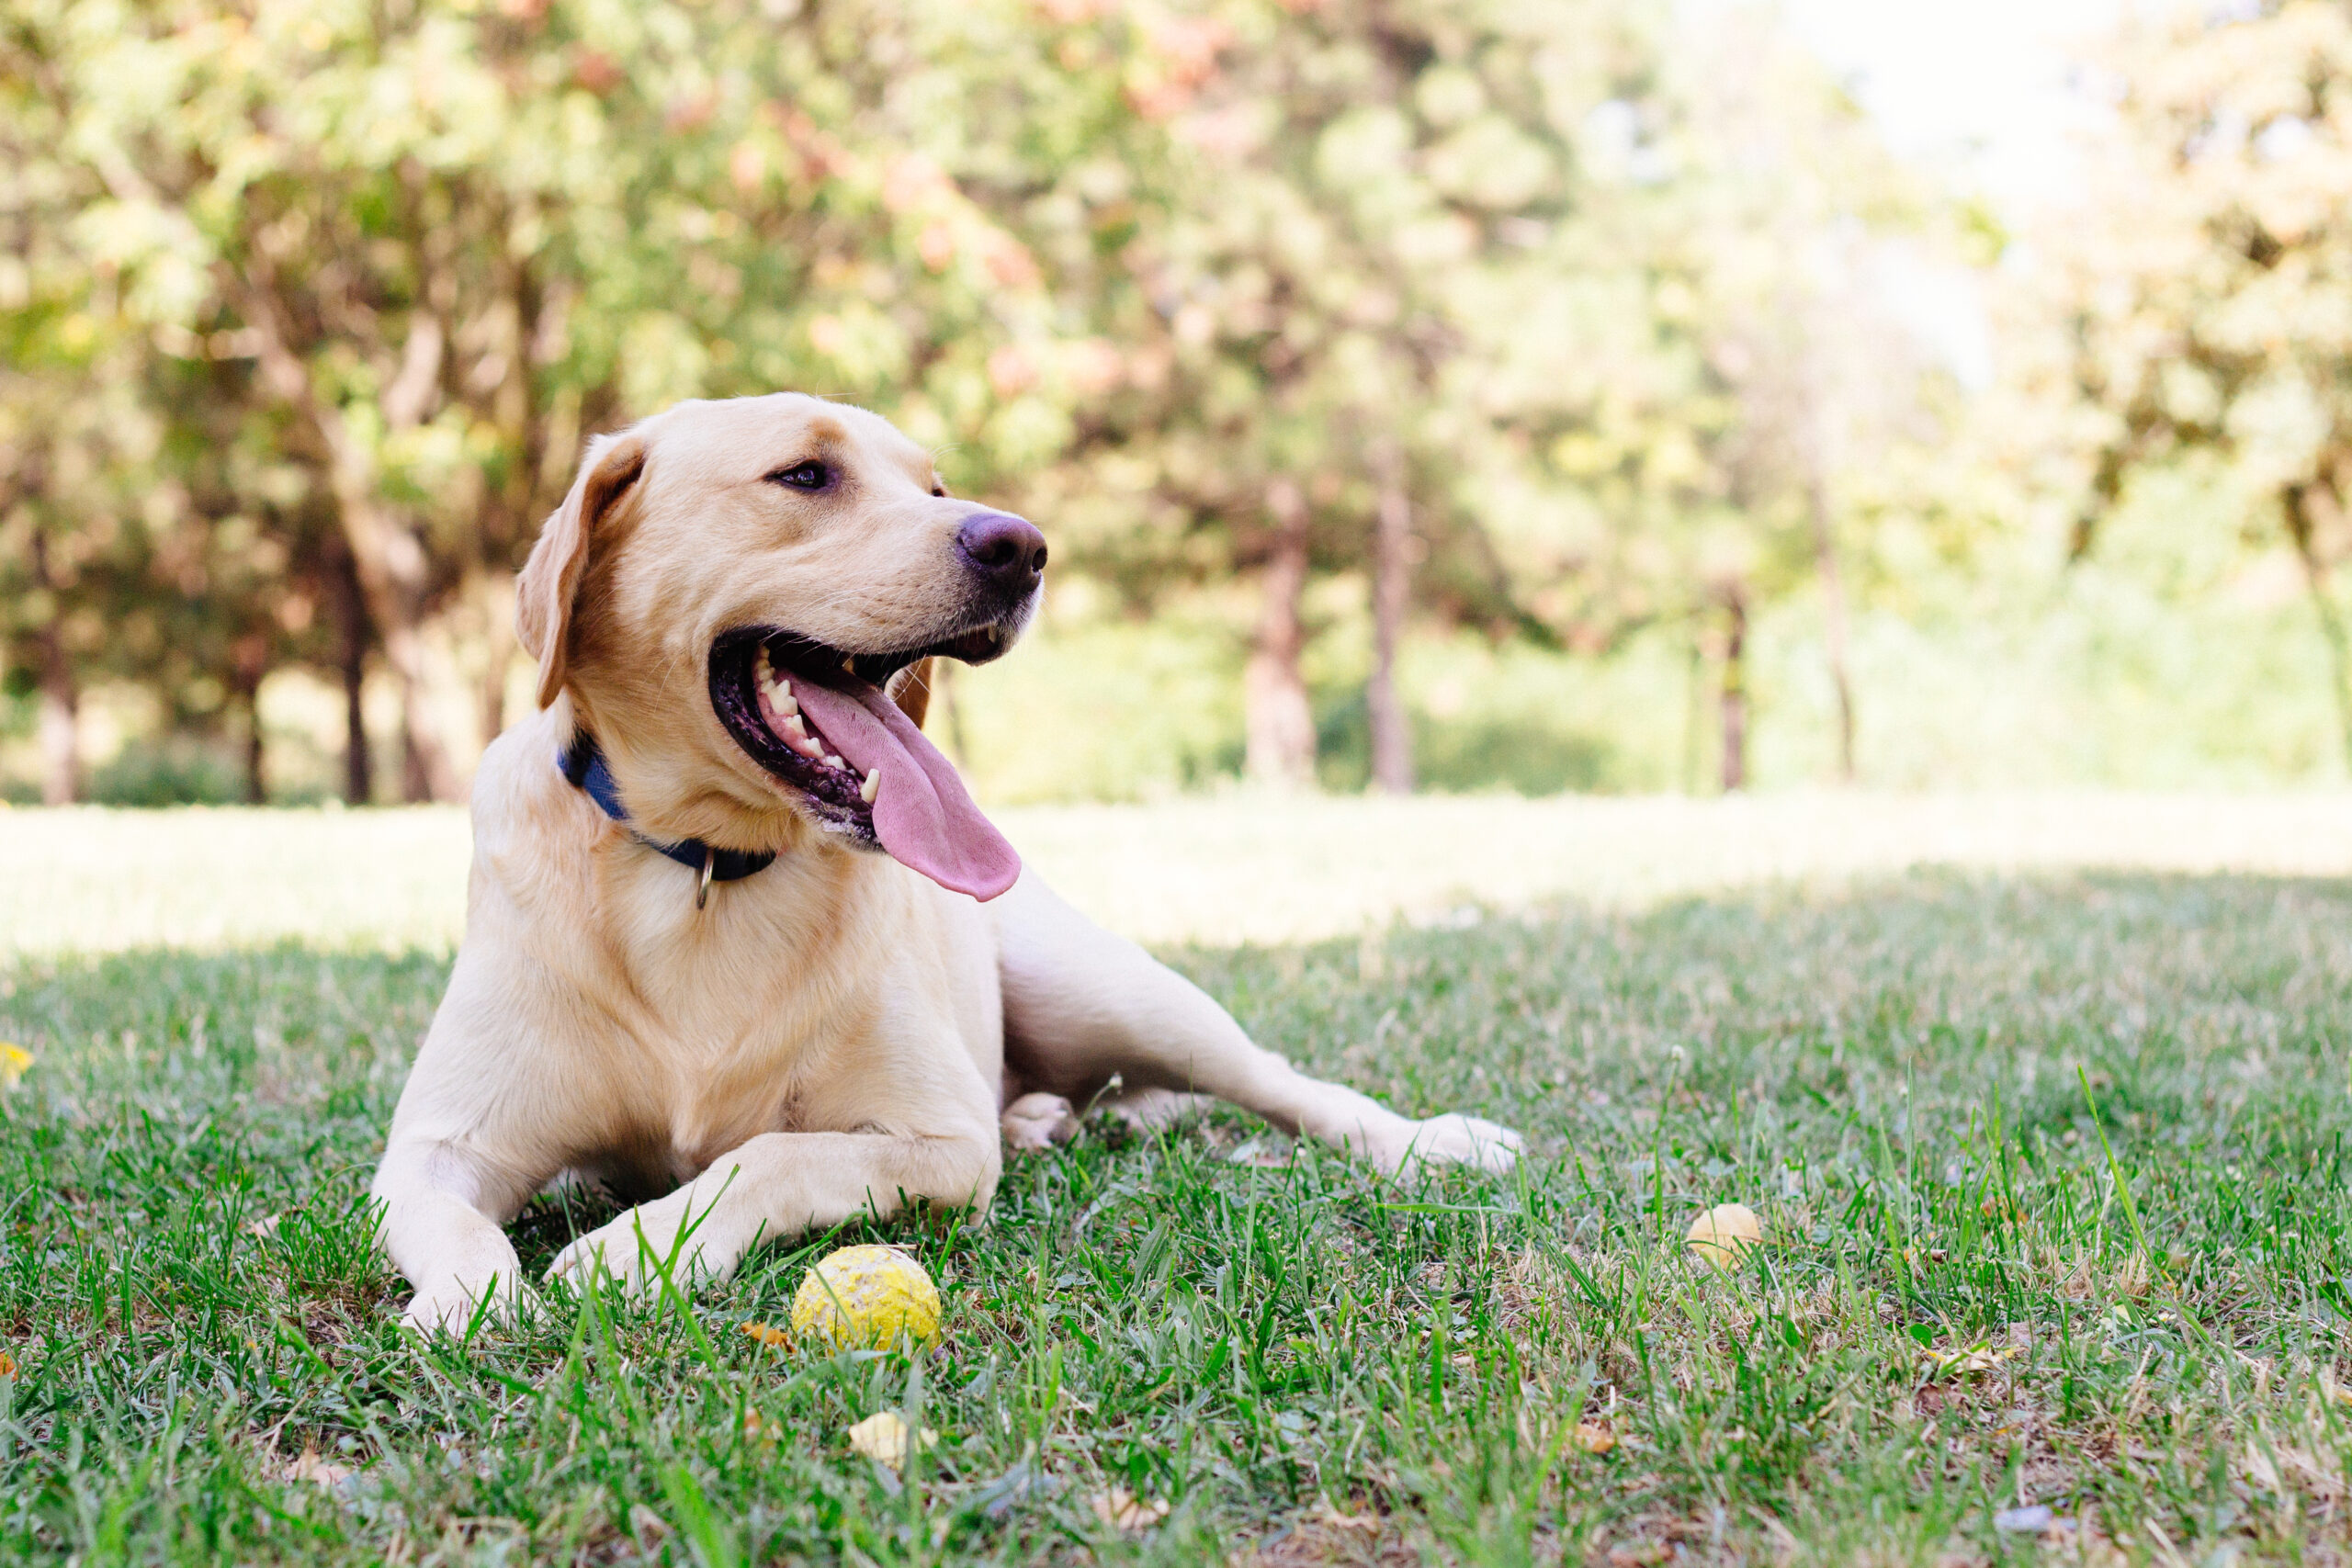 Is Your Dog Choking or Reverse Sneezing?